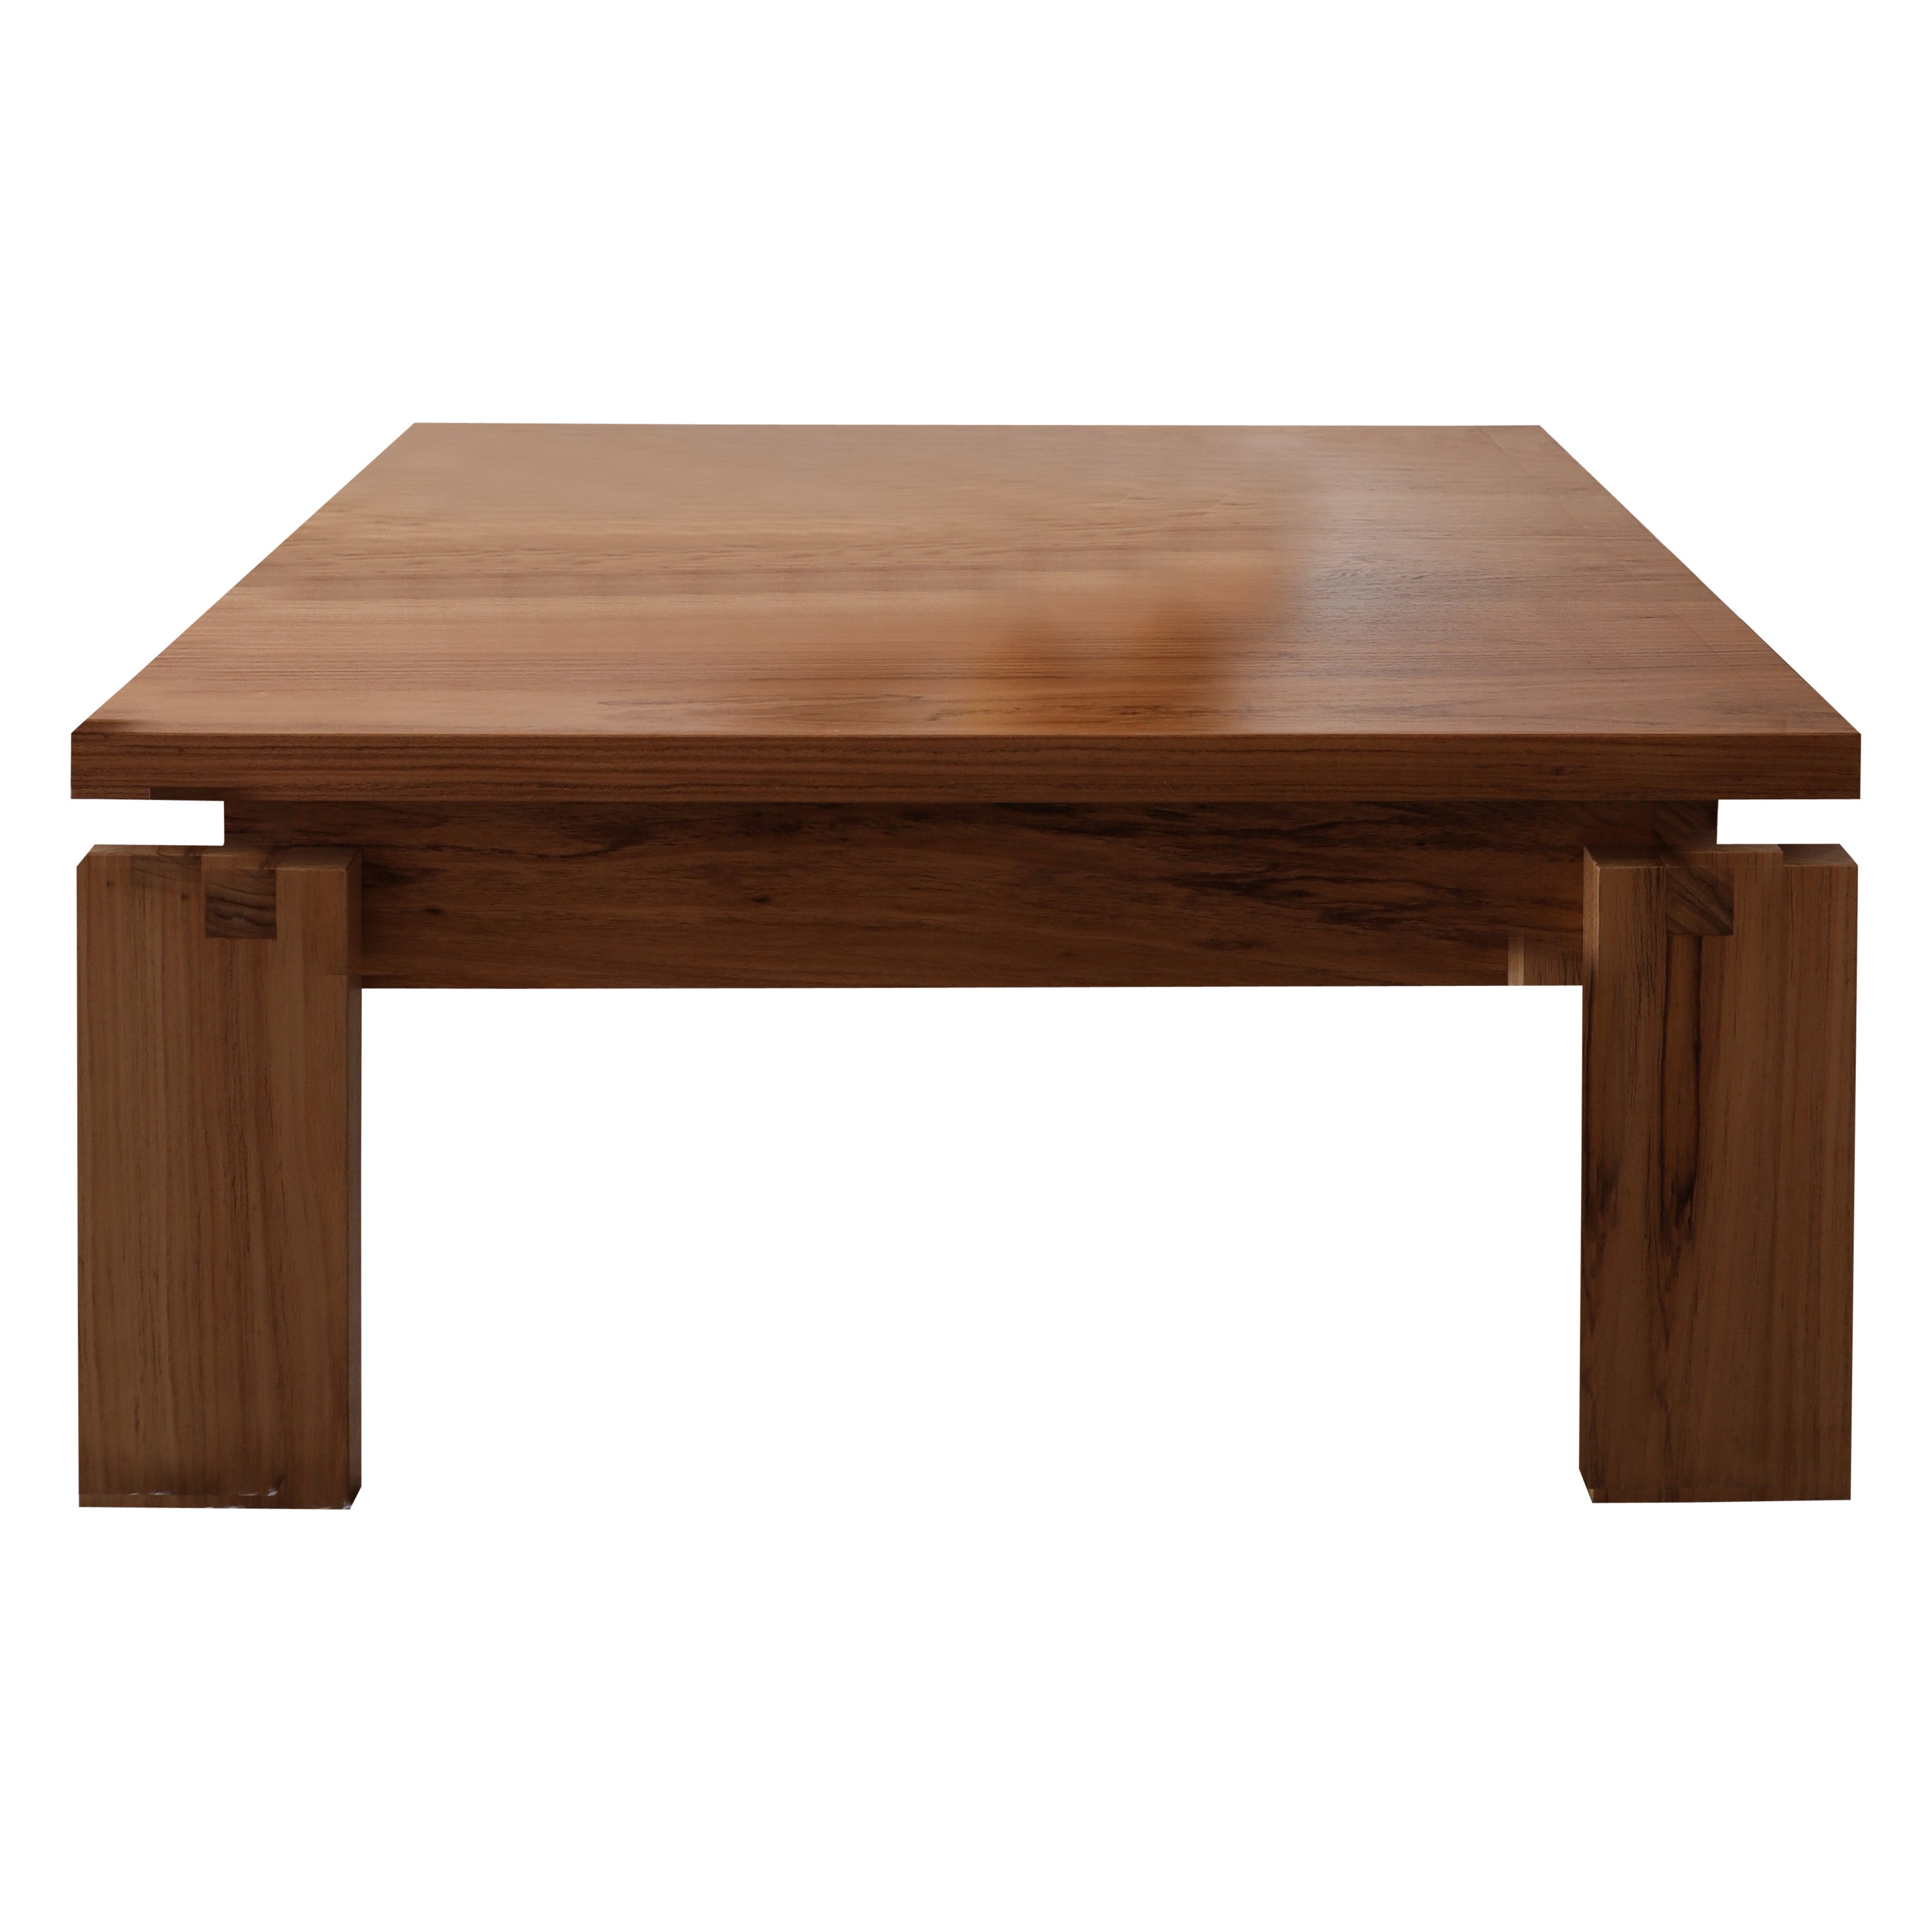 Solid wood, processed in large width and thickness dimensions, and it adds life to this piece of straight and modernist shapes.

In its artisan production, traditional woodworking techniques are applied, having their structure fully built by